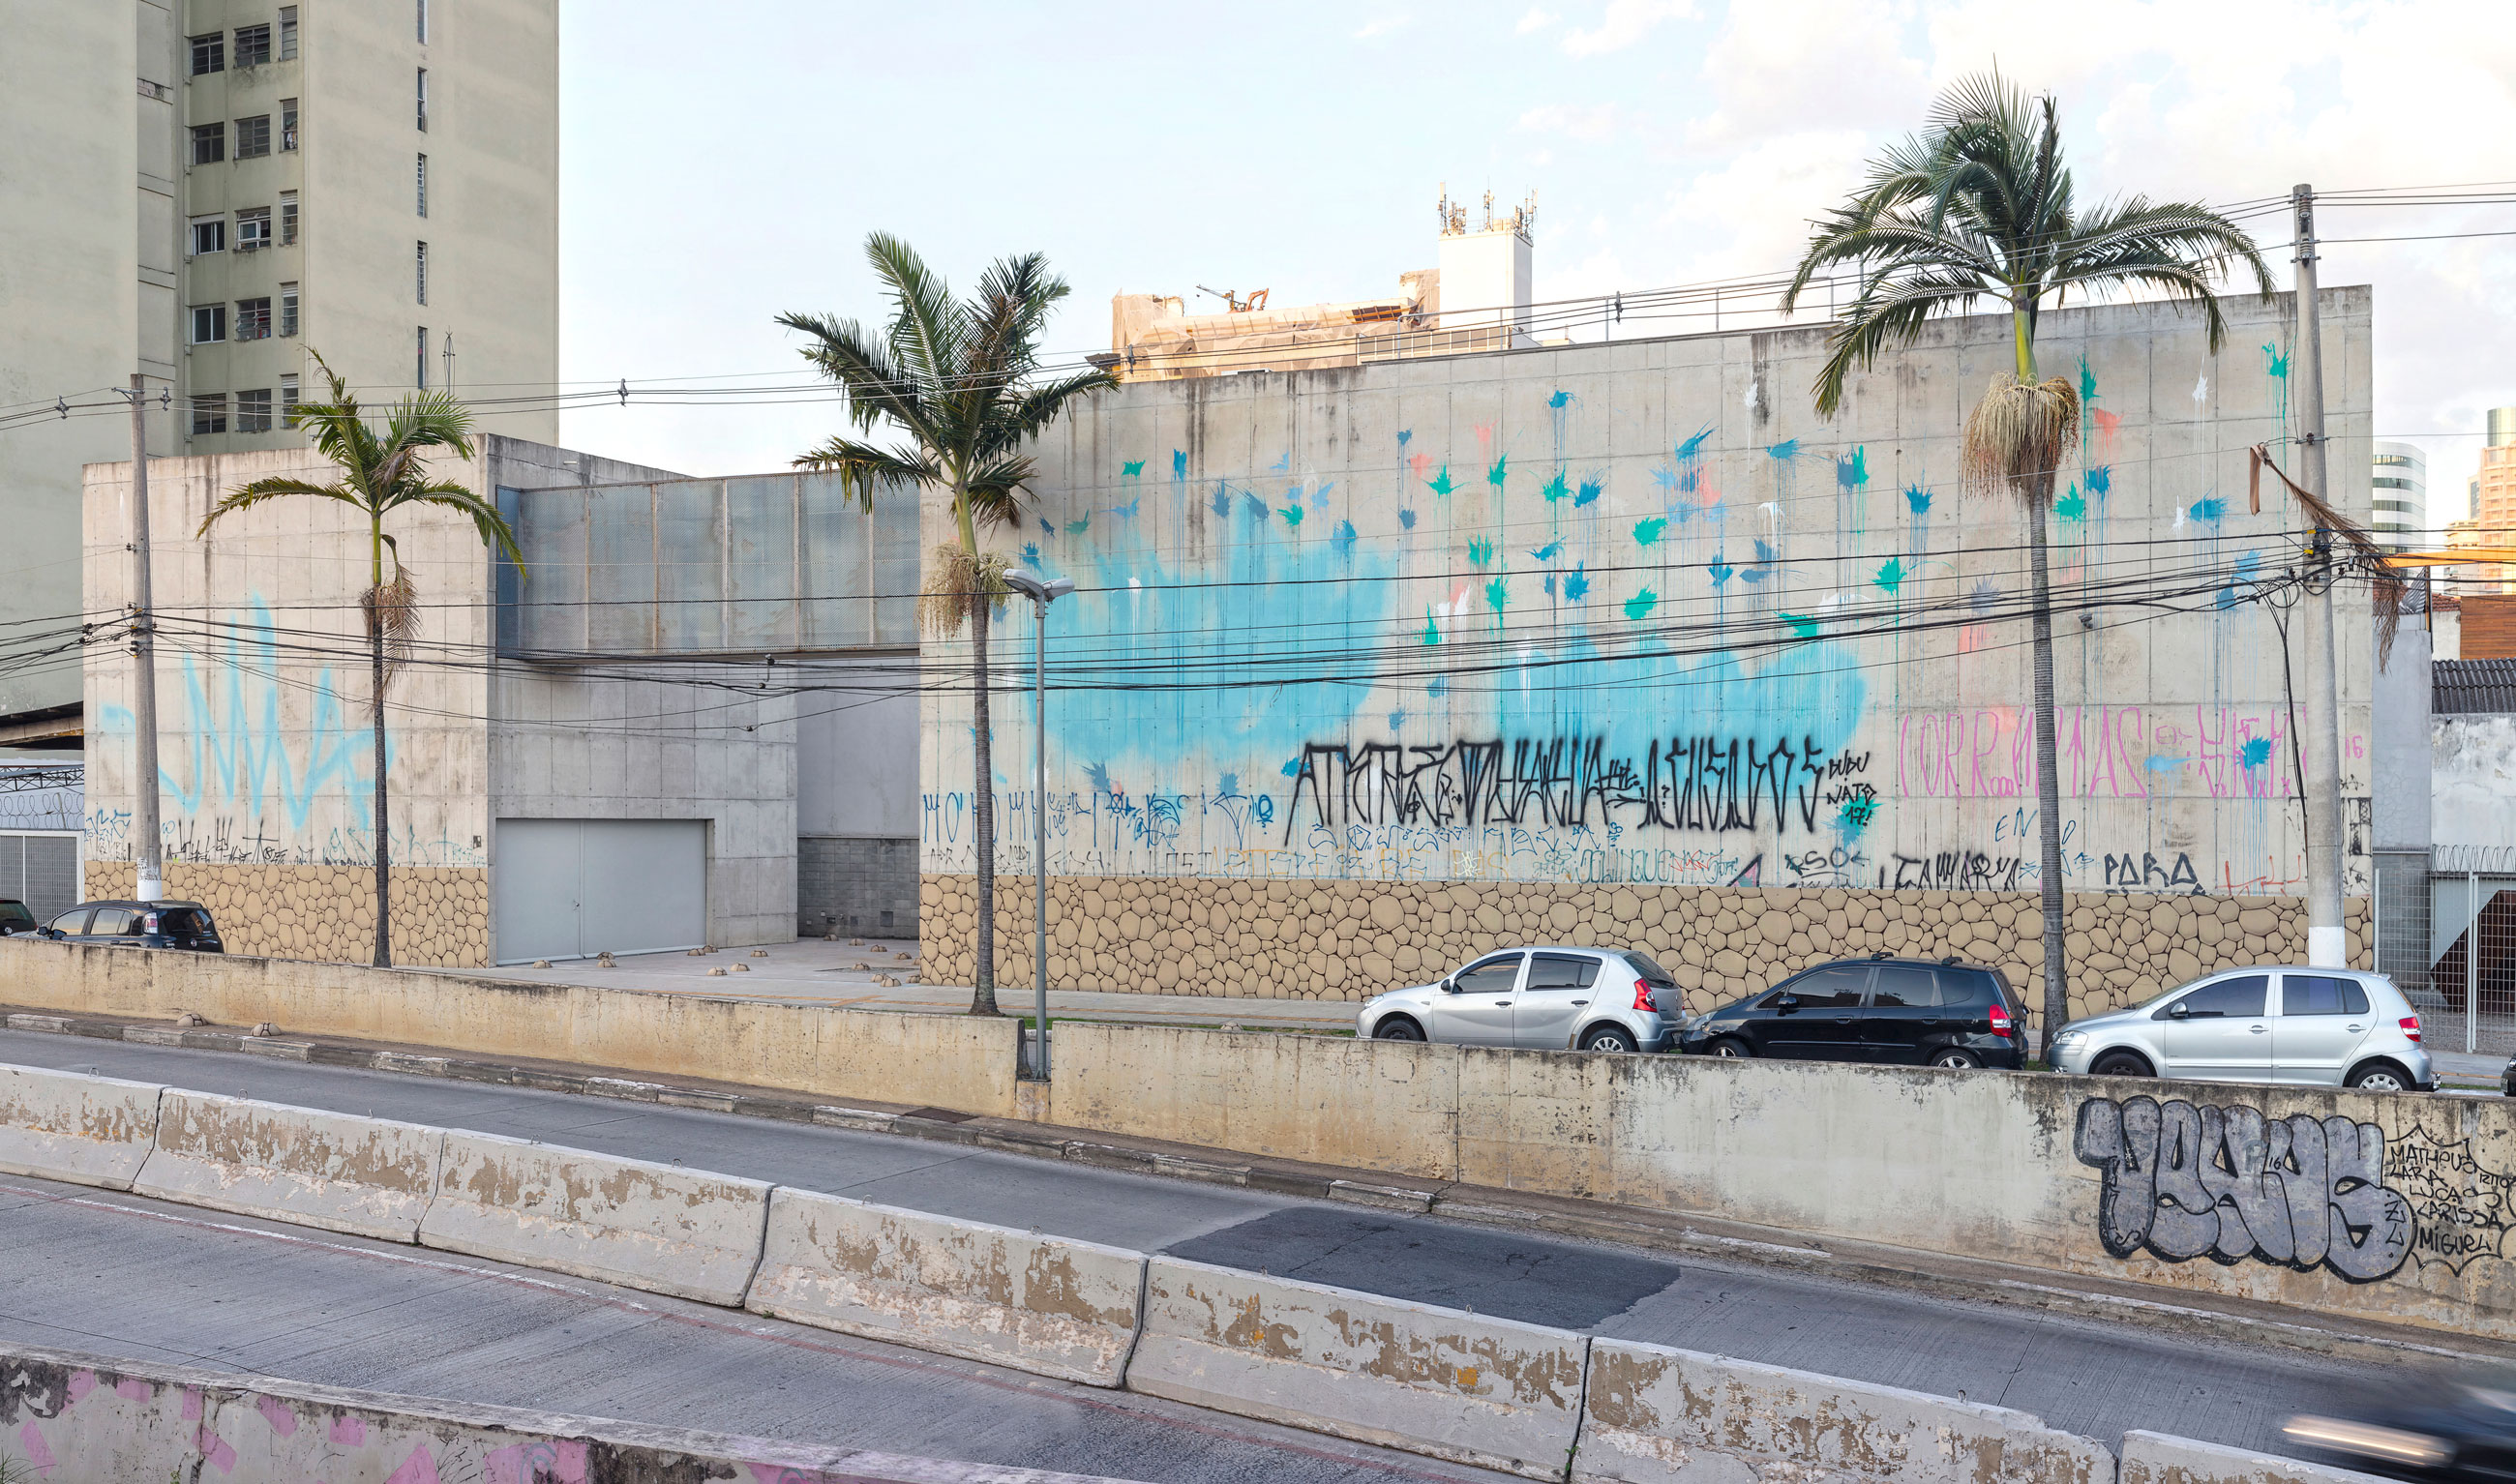 Site-specific Installation titled Errata by artist Ana Dias Batista, consisting of a graffitti with the pattern of a rock wall over the facade of Galeria Leme, curated by Bruno Alves de Almeida for the project SITU, São Paulo, Brazil.